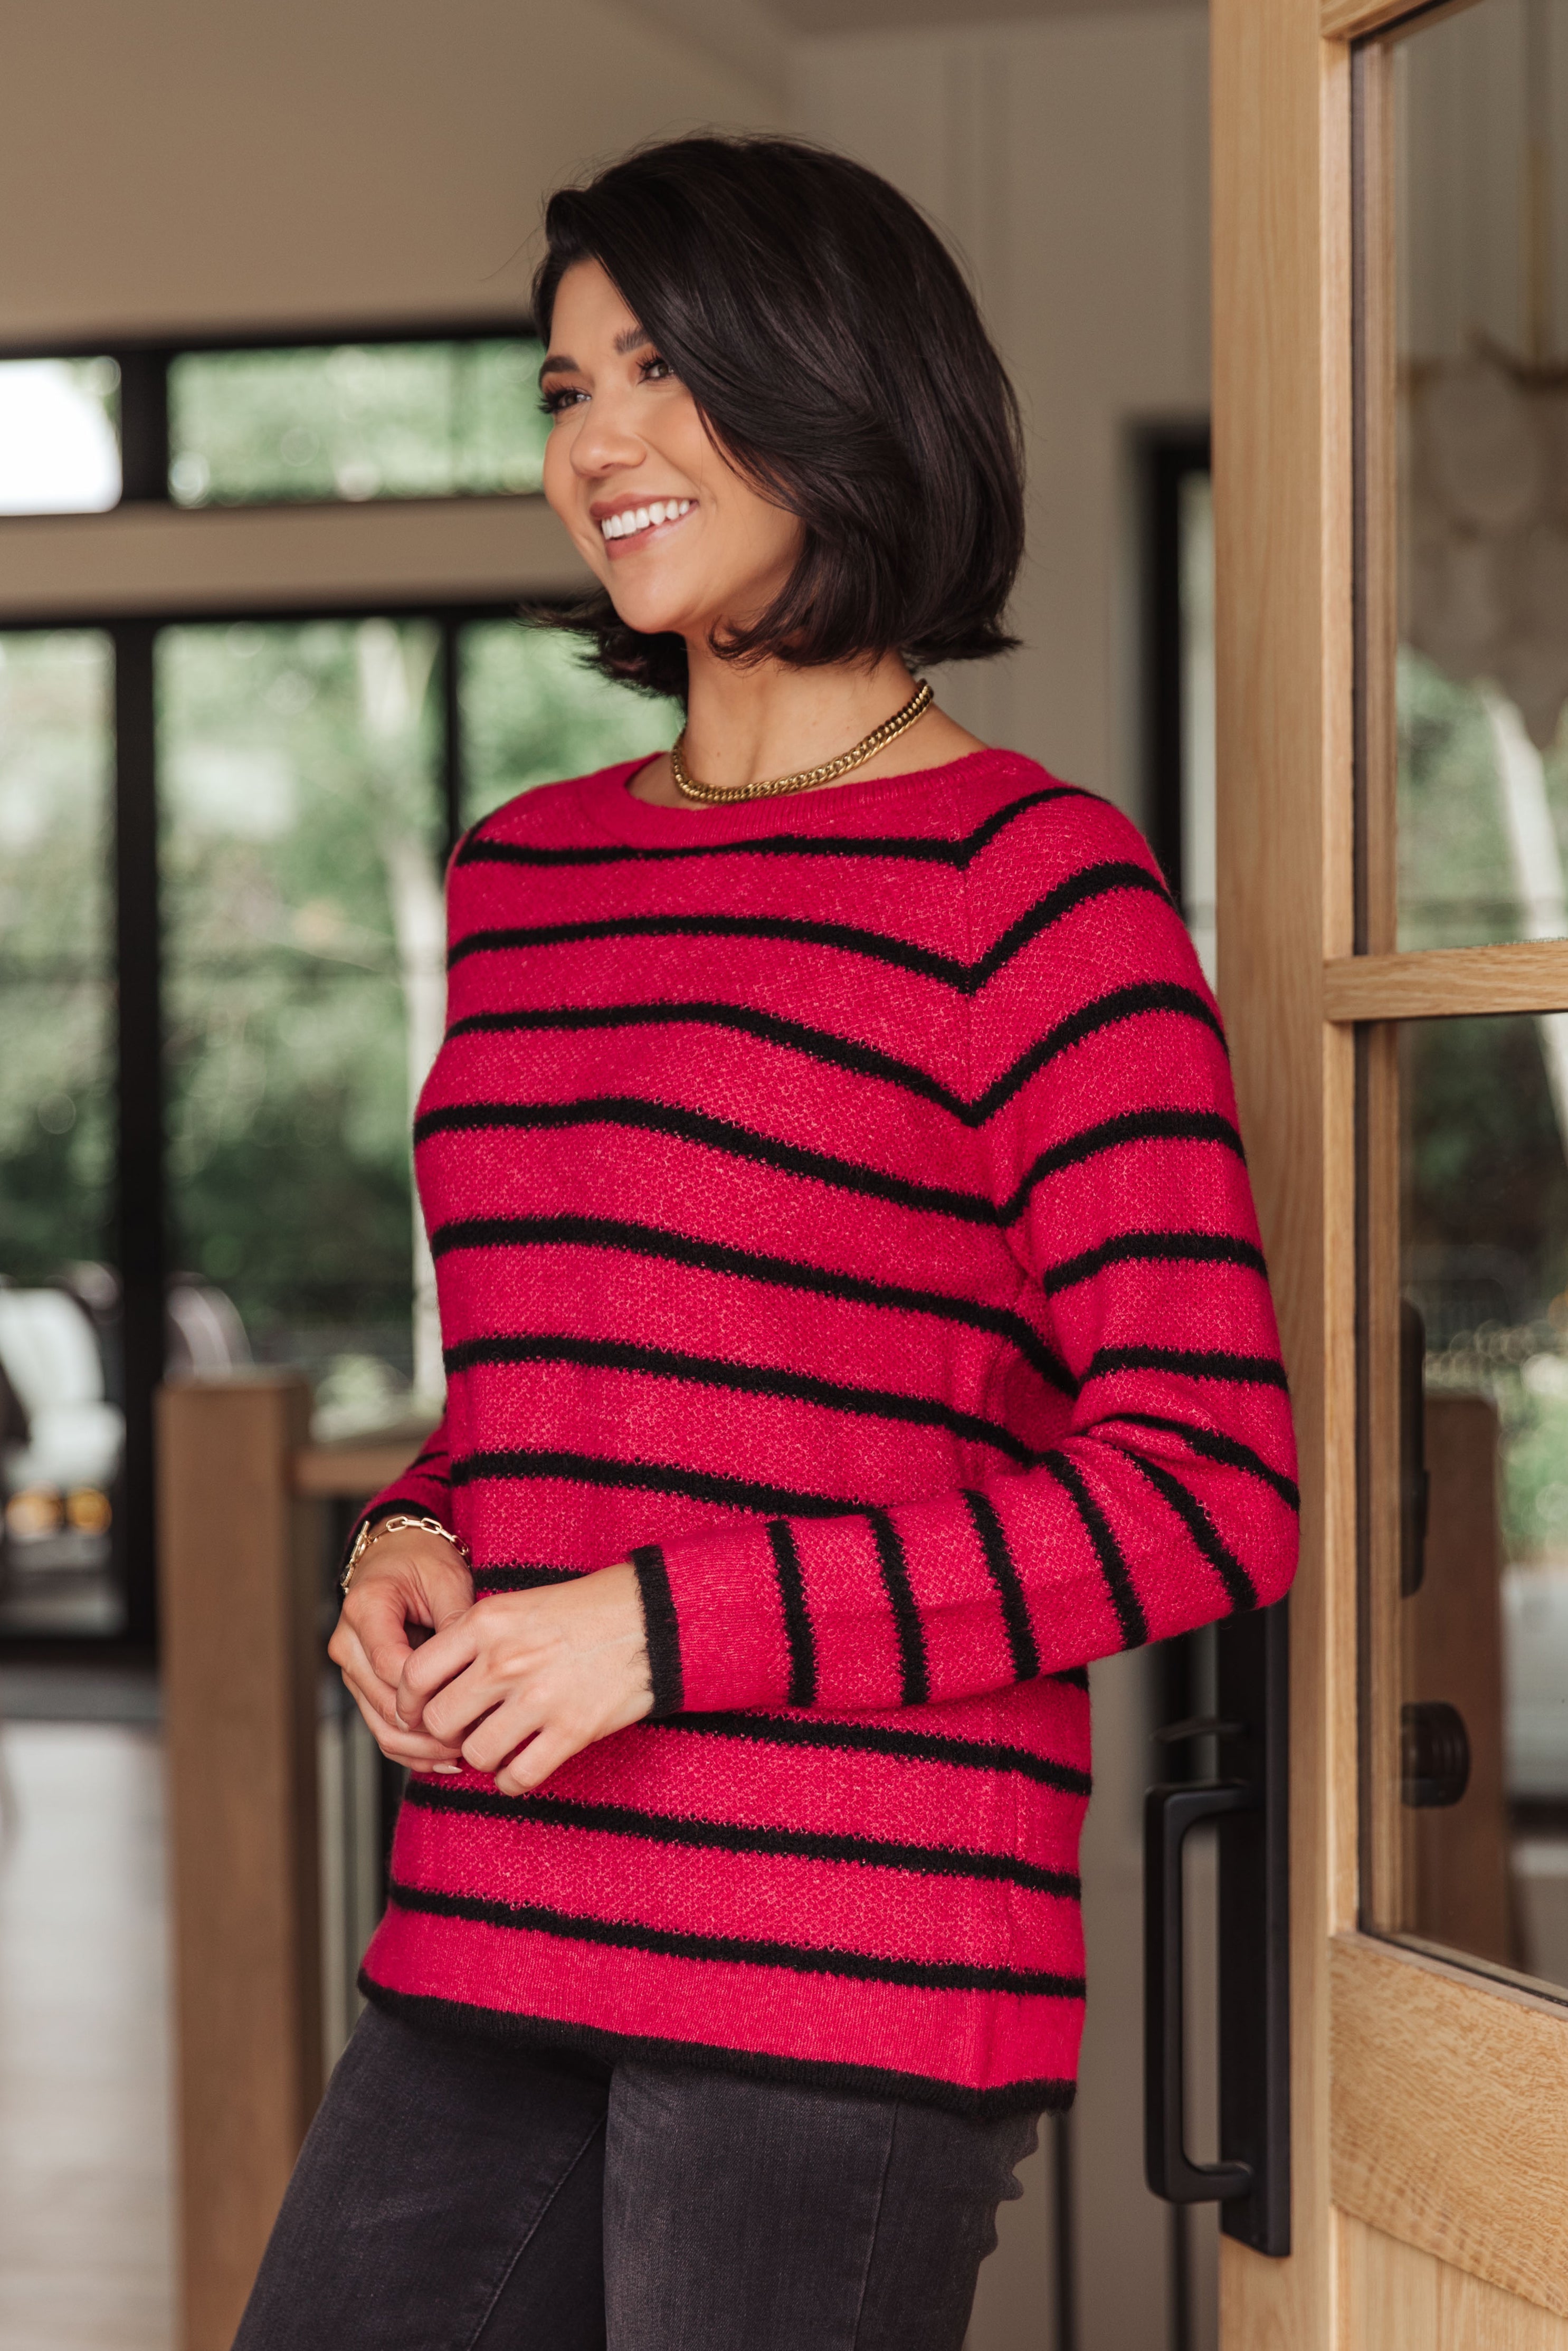 Are We There Yet? Striped Sweater - Lola Cerina Boutique